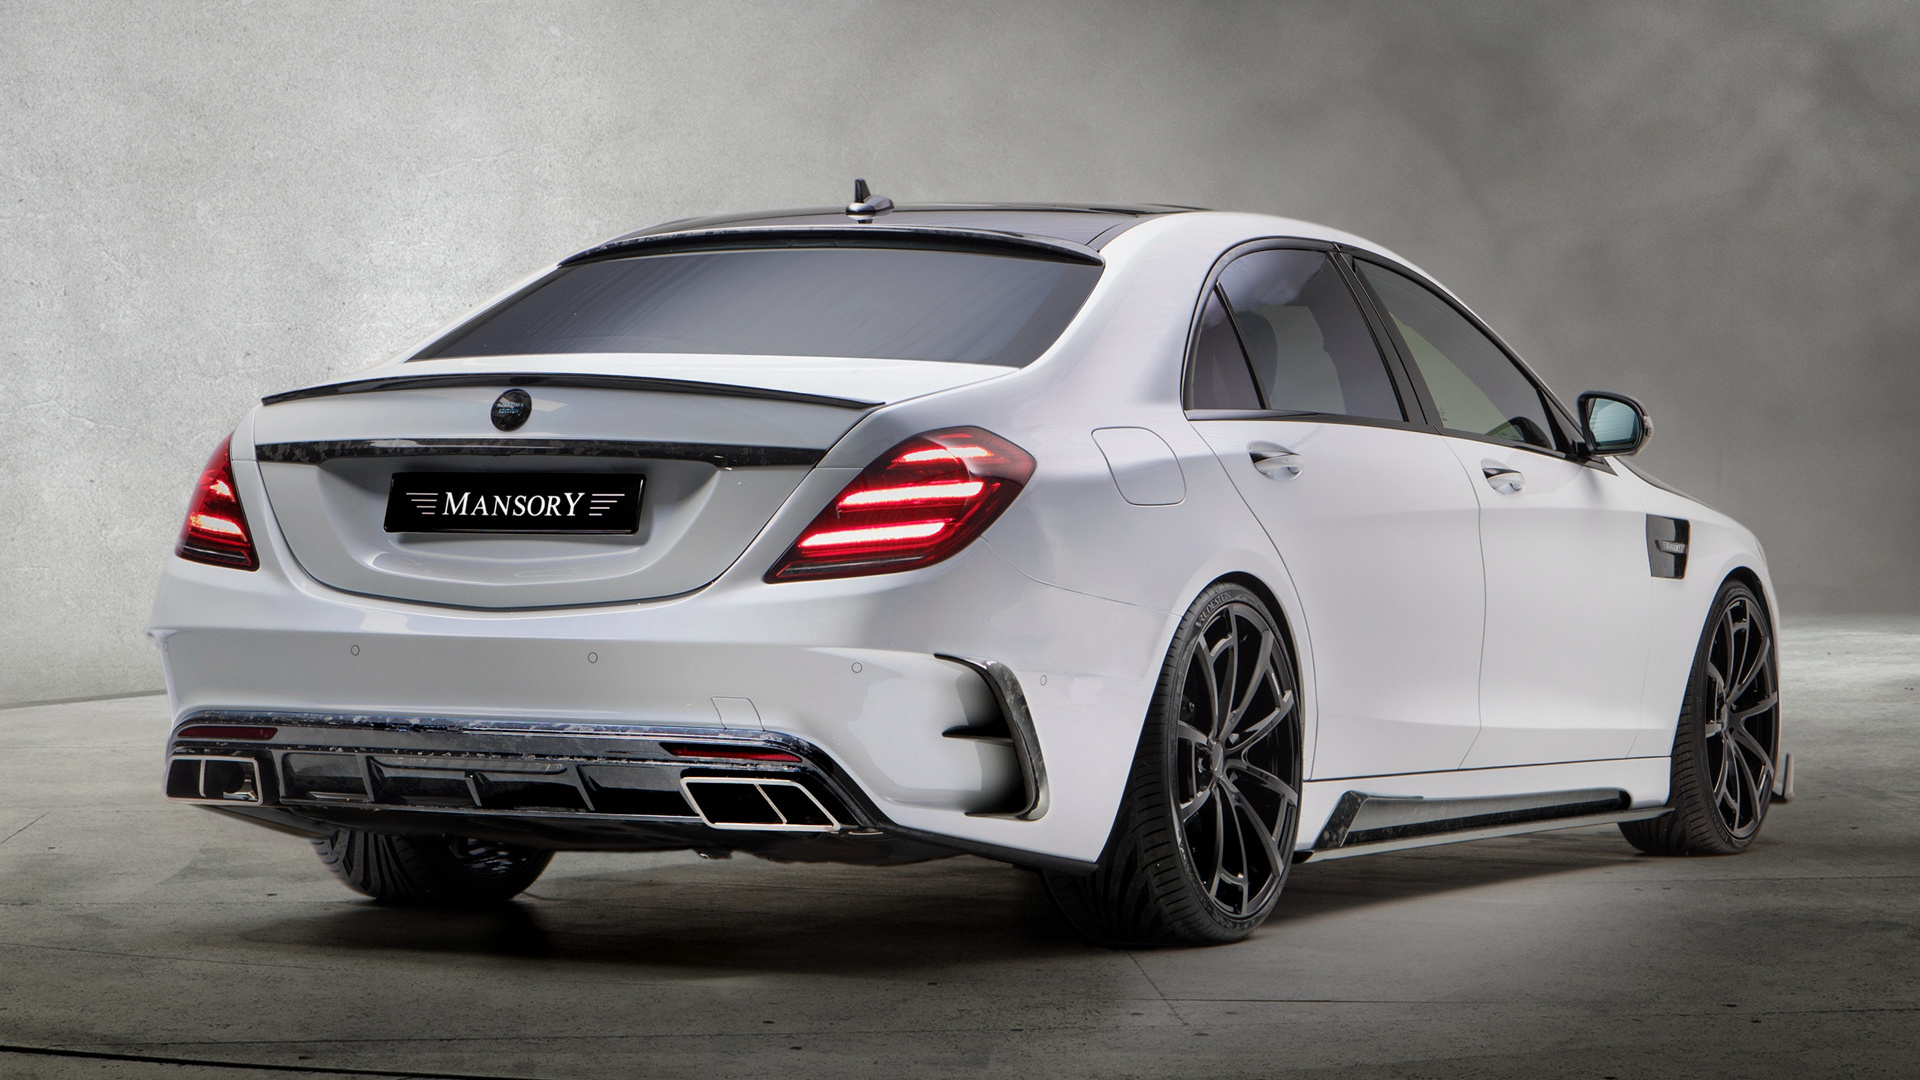 vertical wallpaper mercedes benz, vehicles, mercedes amg s63, car, mercedes amg s 63 signature edition by mansory, sedan, white car